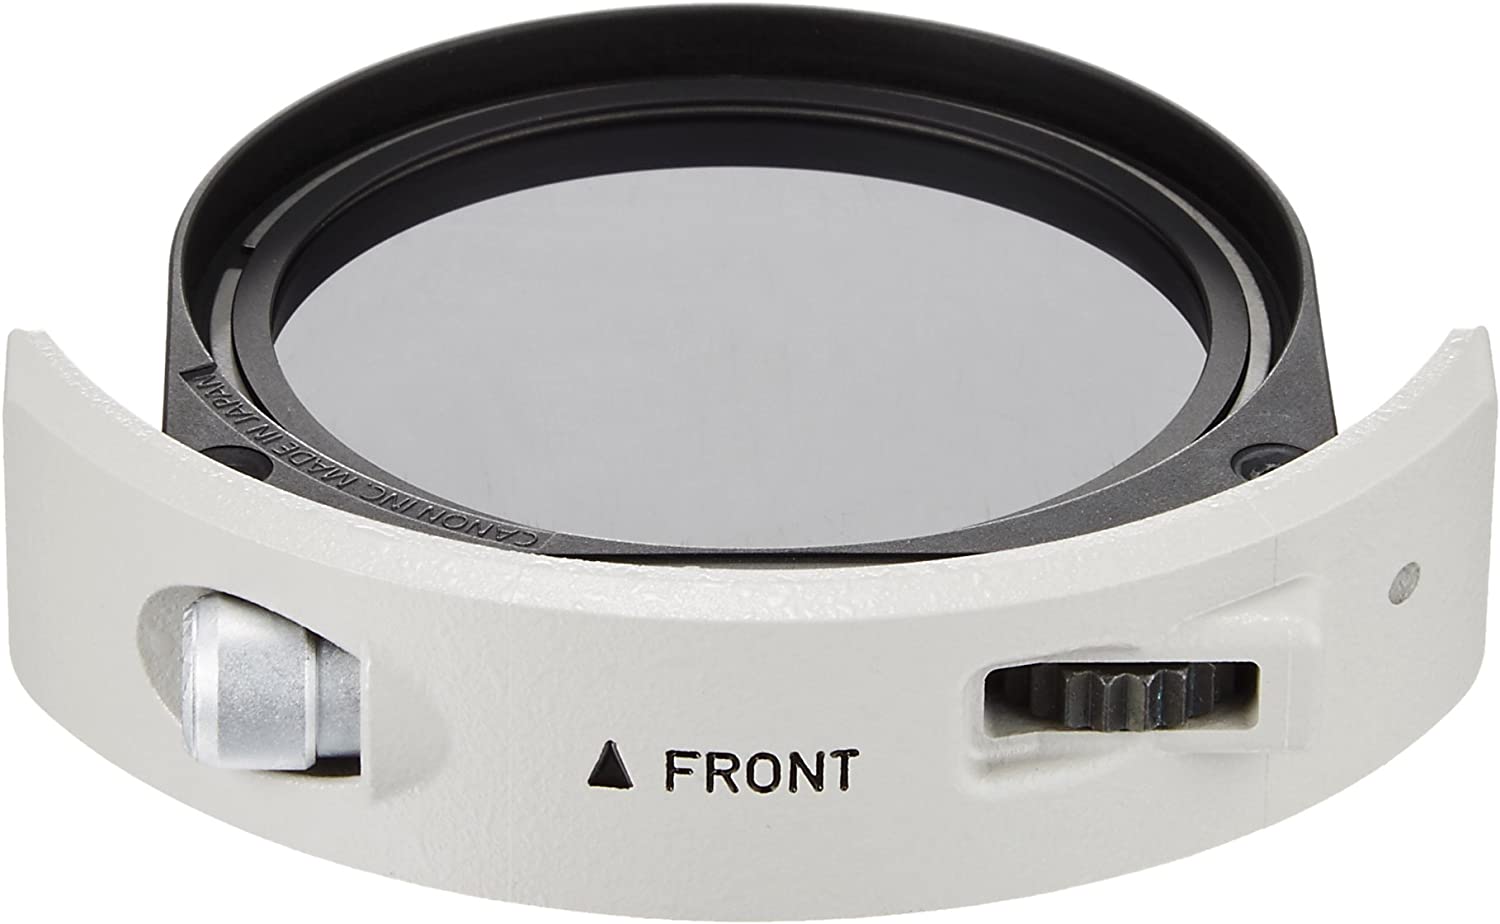 Canon PL-C 52 (WII) Drop-in Circular Polarising Filter II for Mark II 300mm, 400mm, 500mm, 600mm lenses